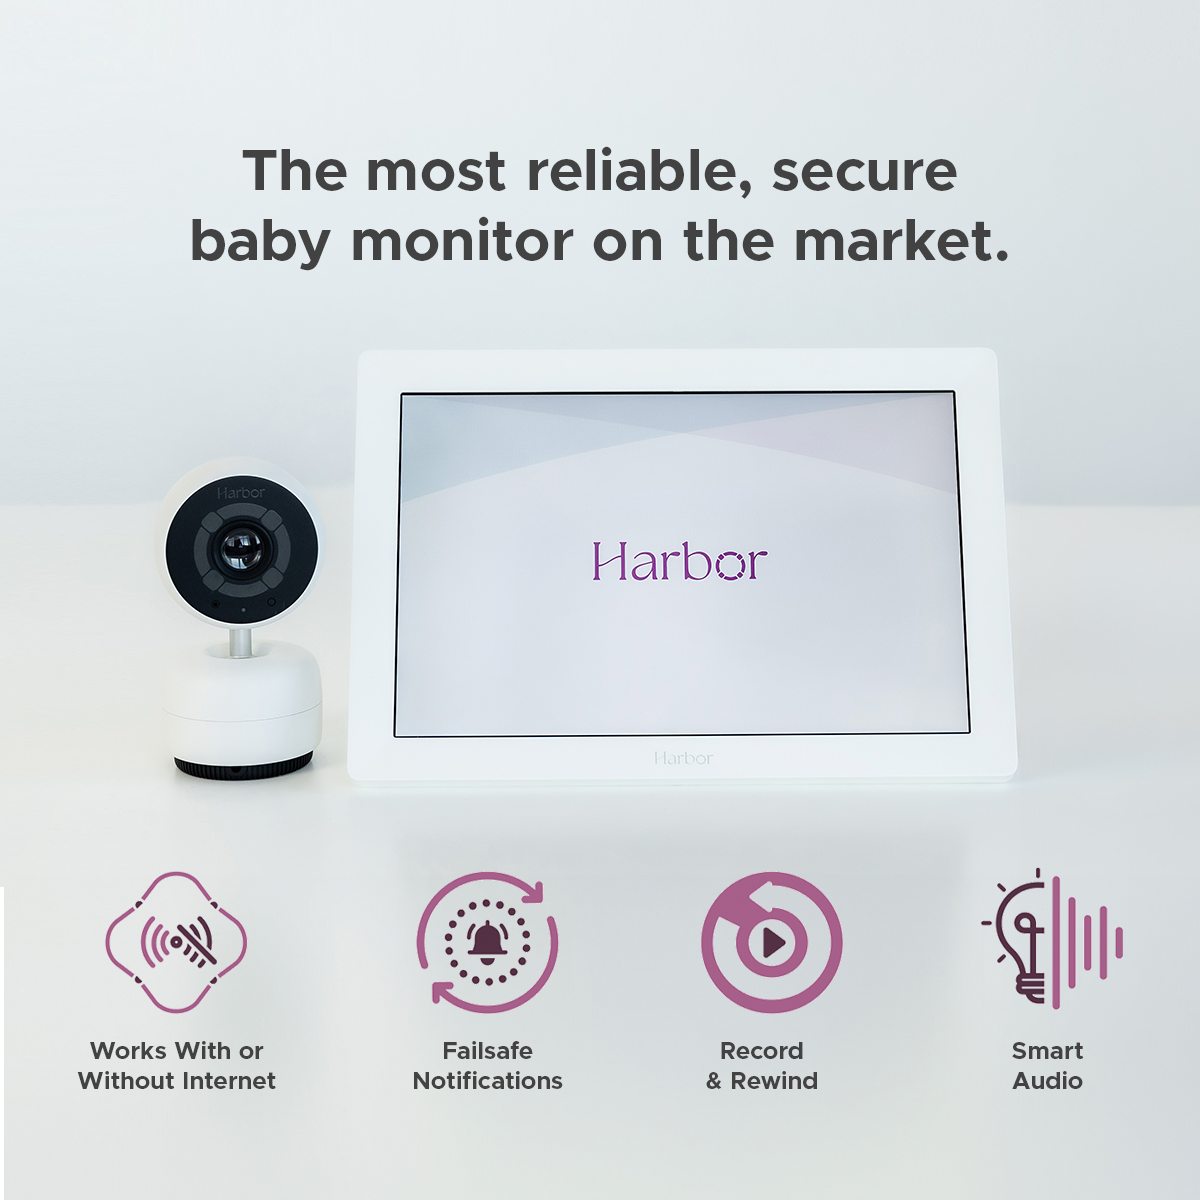 The most reliable, secure baby monitor on the market.